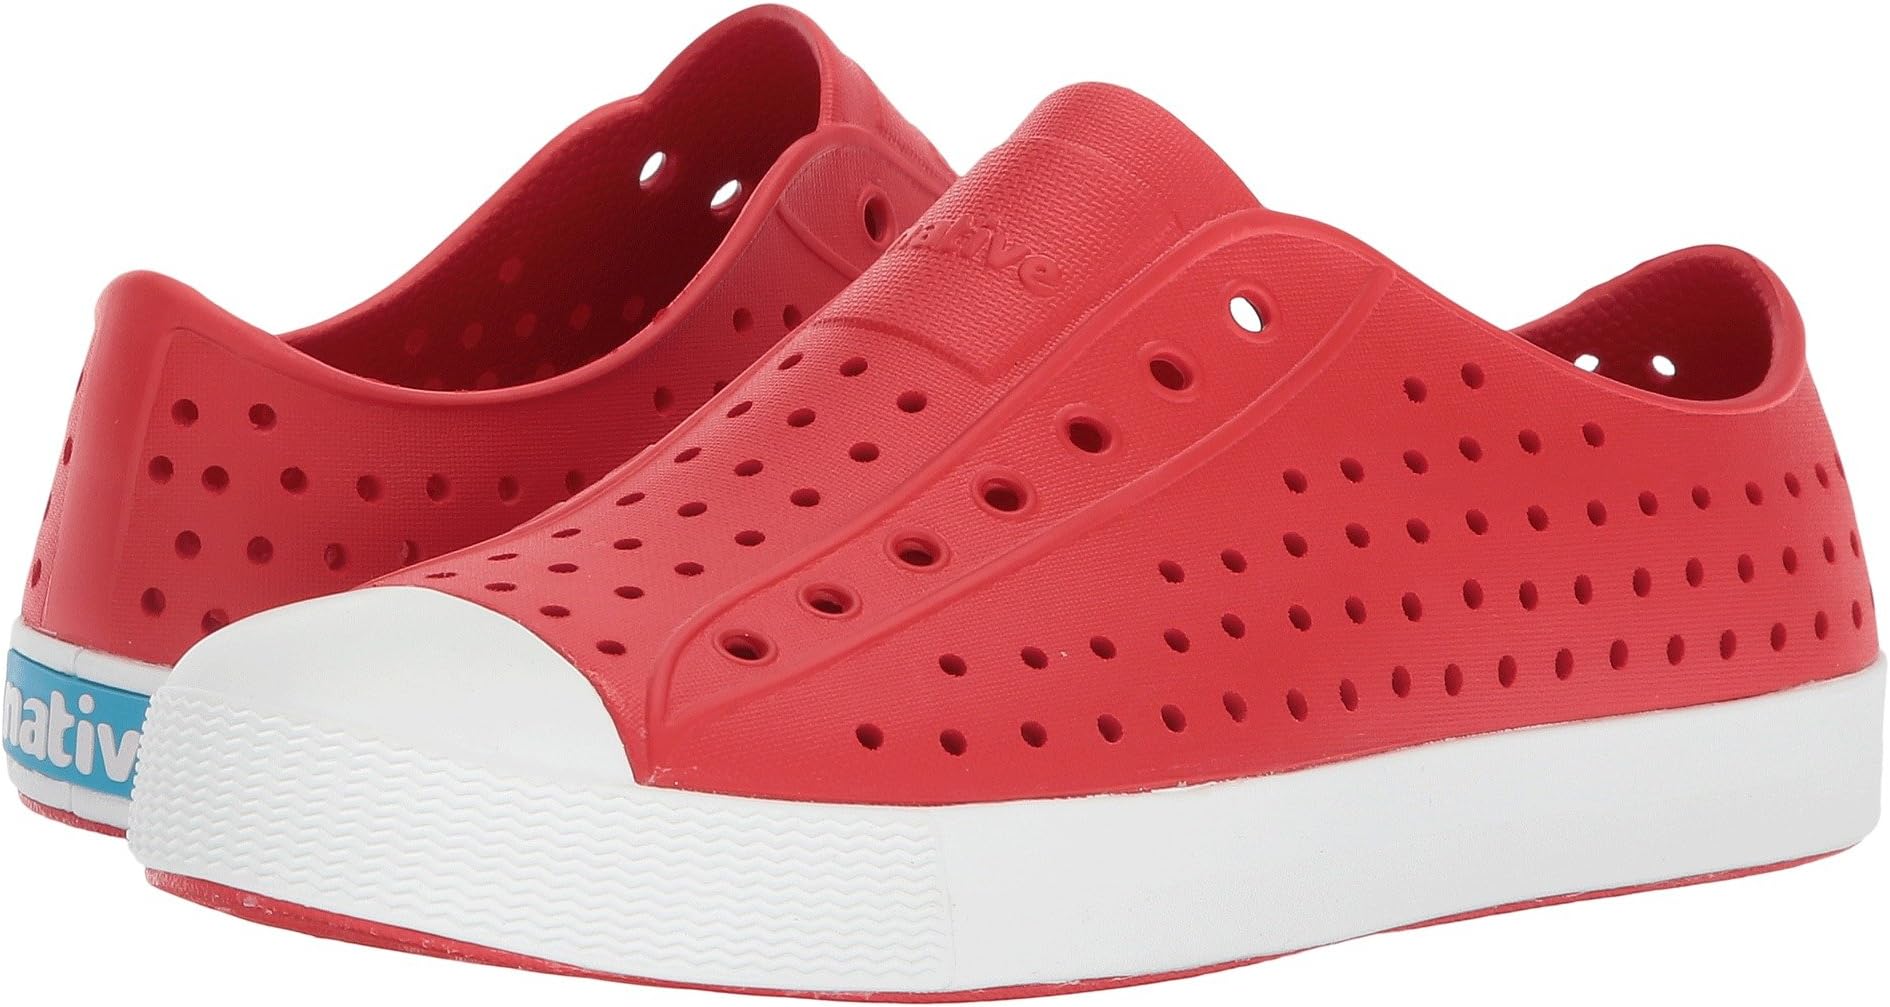 Кроссовки Jefferson Slip-on Sneakers Native Shoes Kids, цвет Torch Red/Shell White кроссовки jefferson slip on sneakers native shoes kids цвет shell white shell white